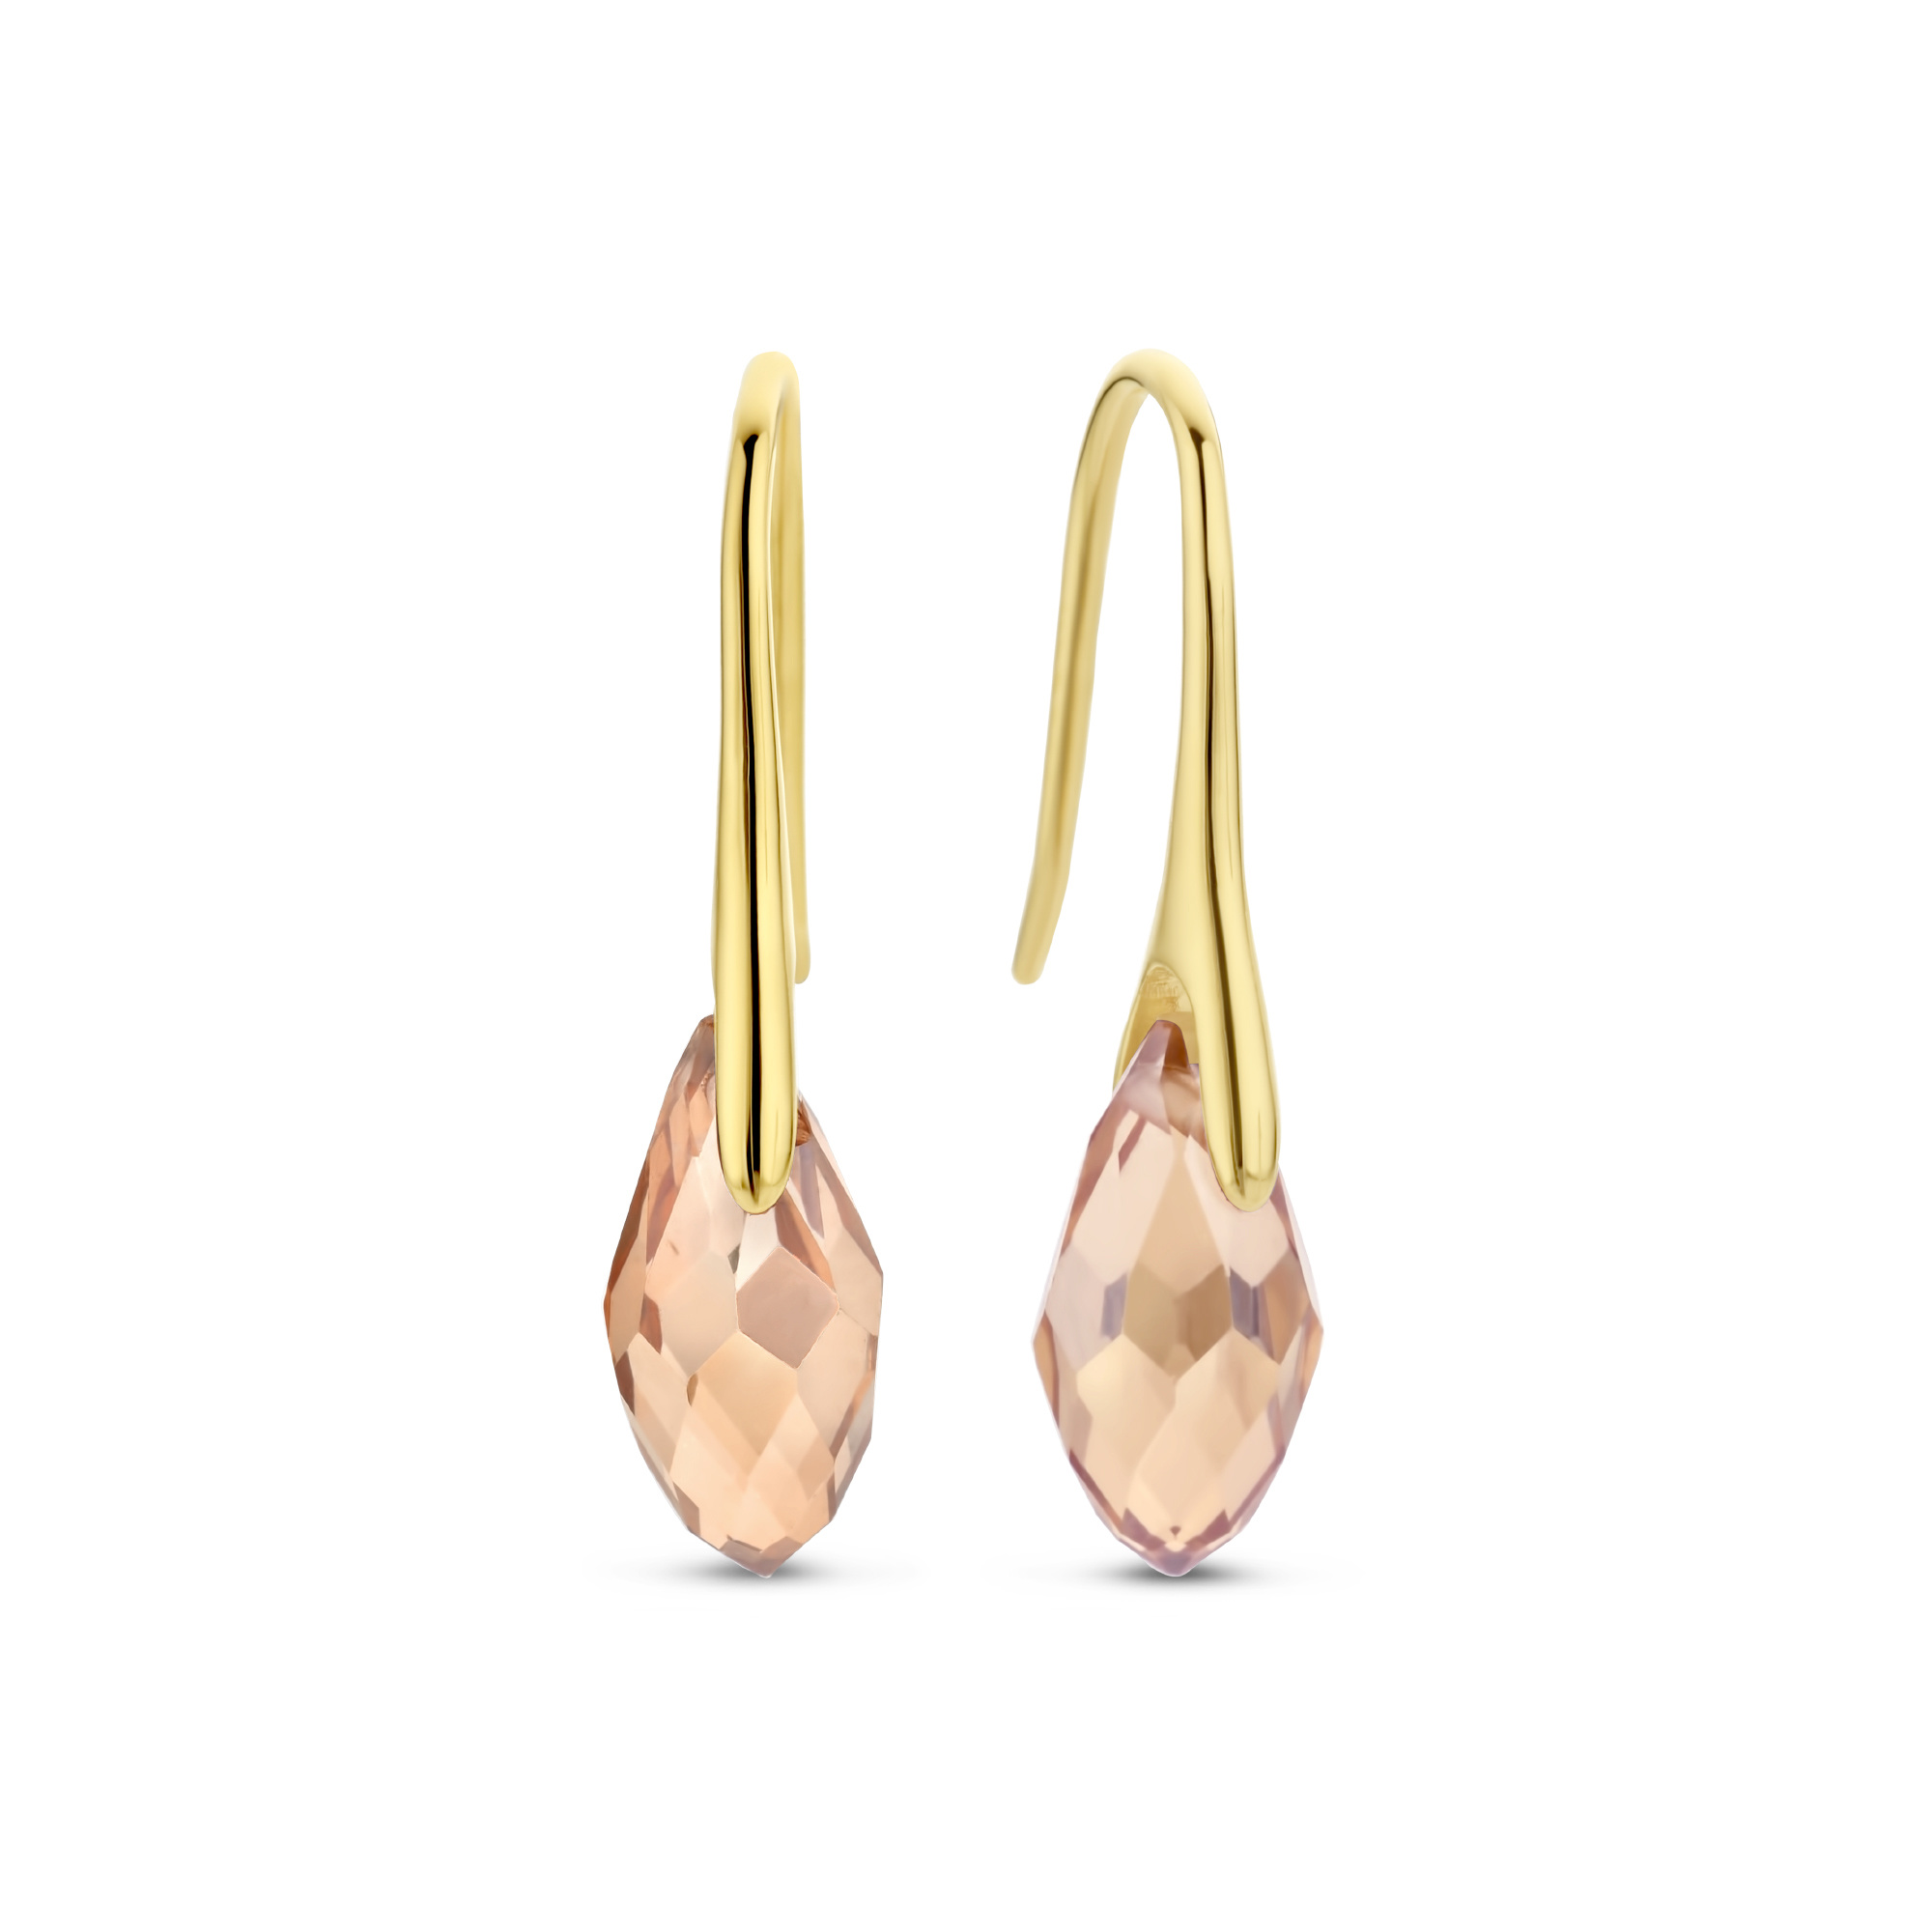 925 sterling silver gold plated drop earrings PDM36146 - Parte Di Me